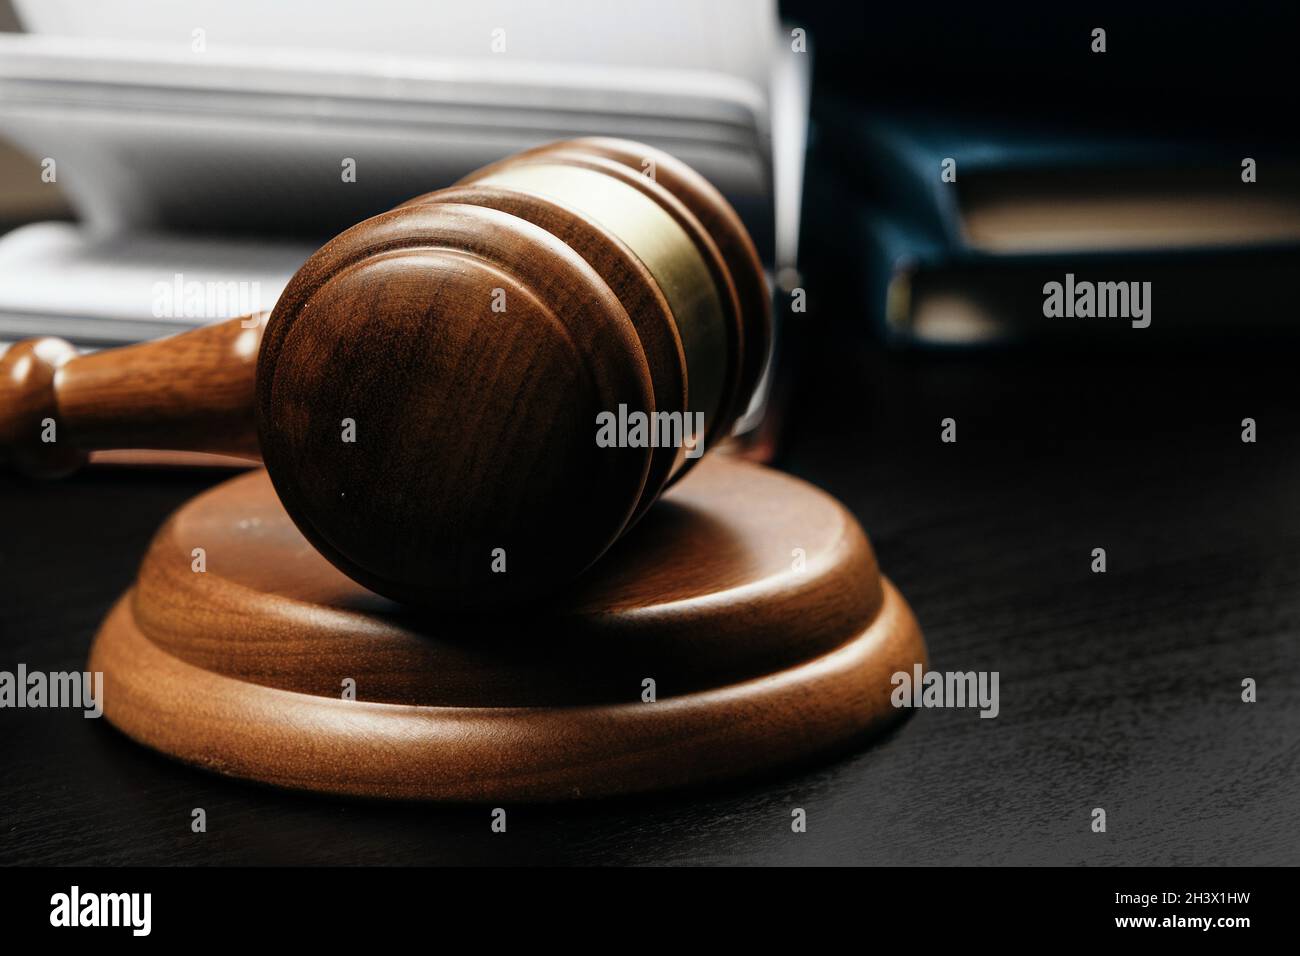 Brown wooden judge mallet on the background of open book Stock Photo